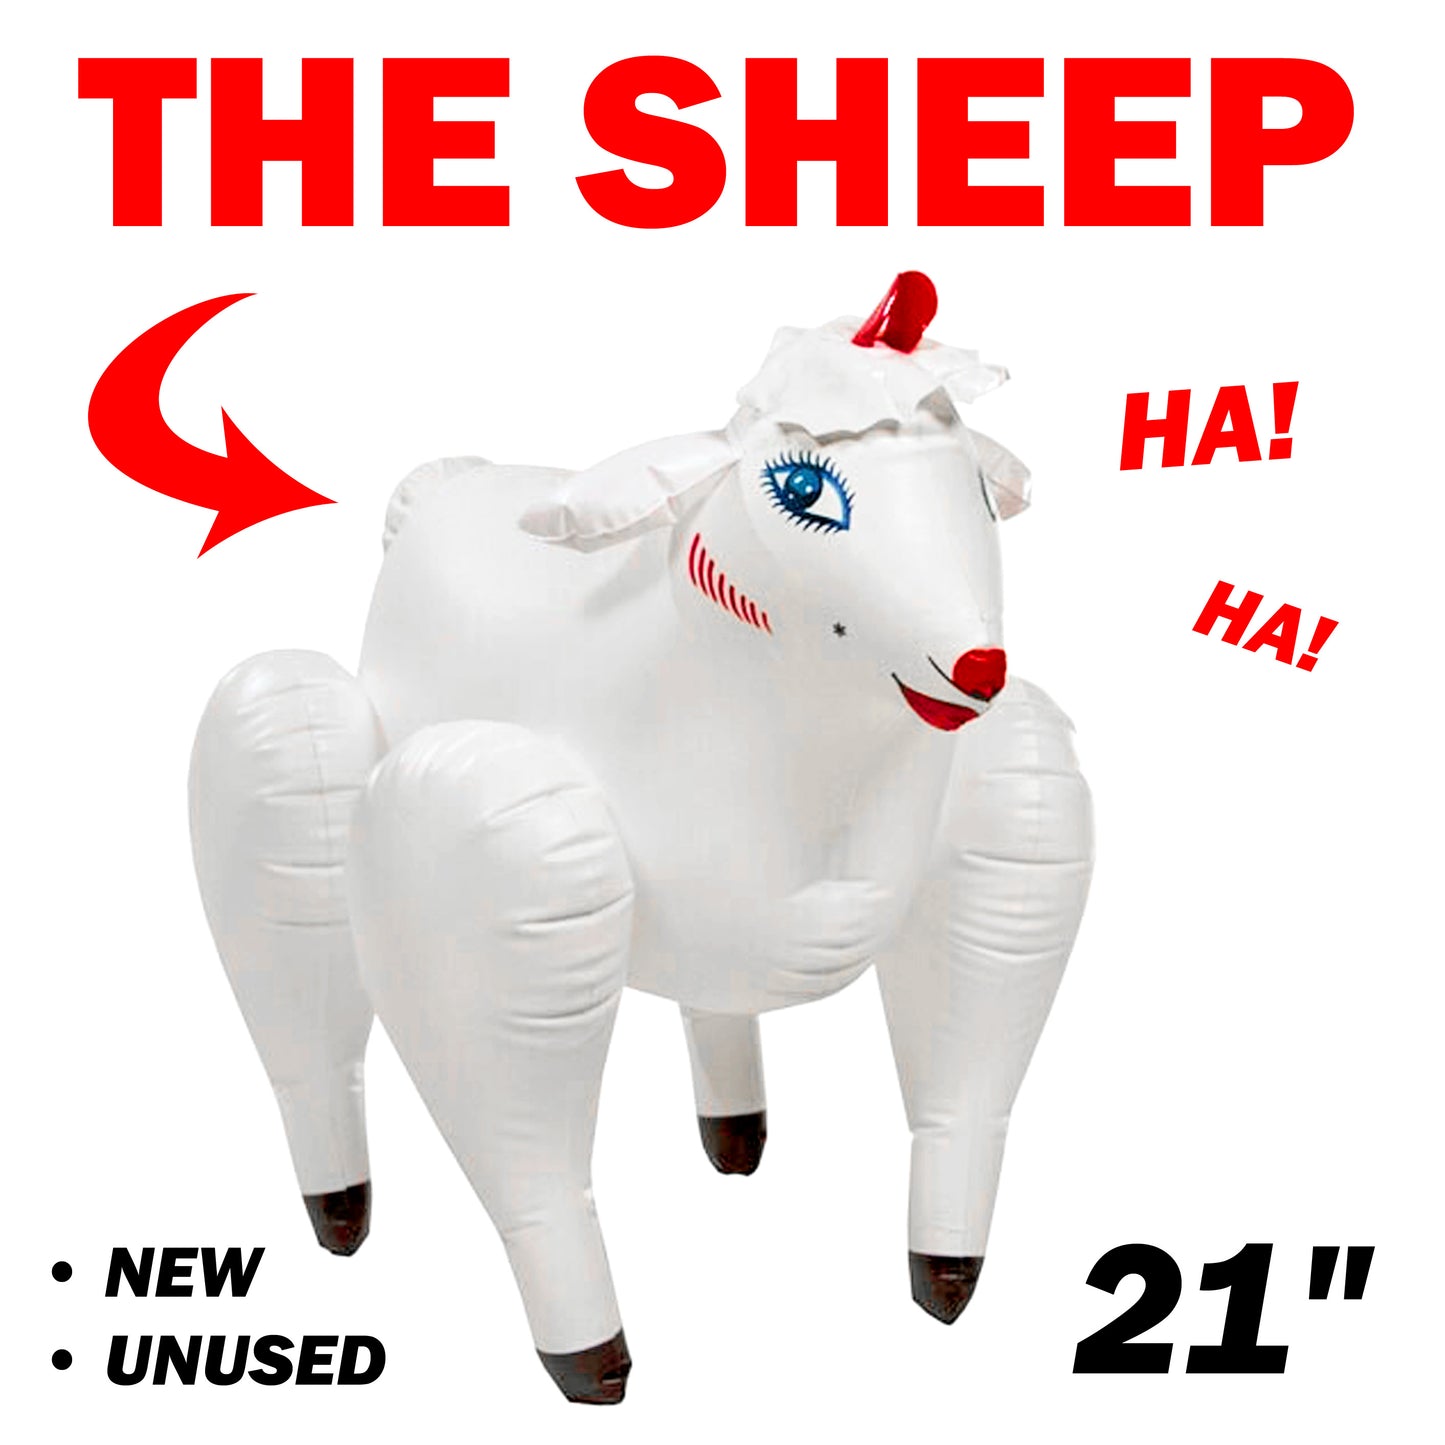 Sheep Shagger embarrassing prank box gets mailed directly to your victims 100% anonymously!